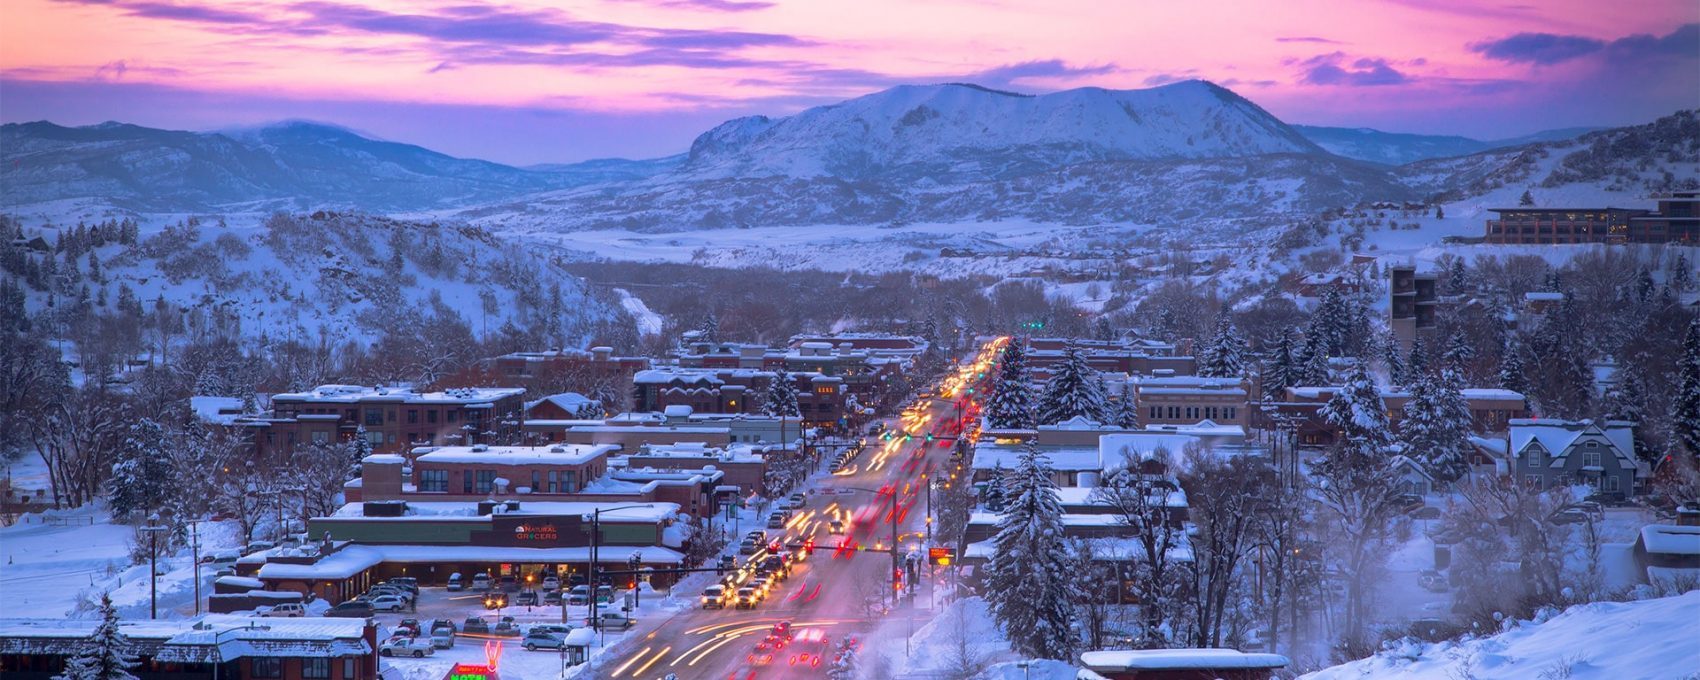 Winter Sunset In Steamboat Colorado